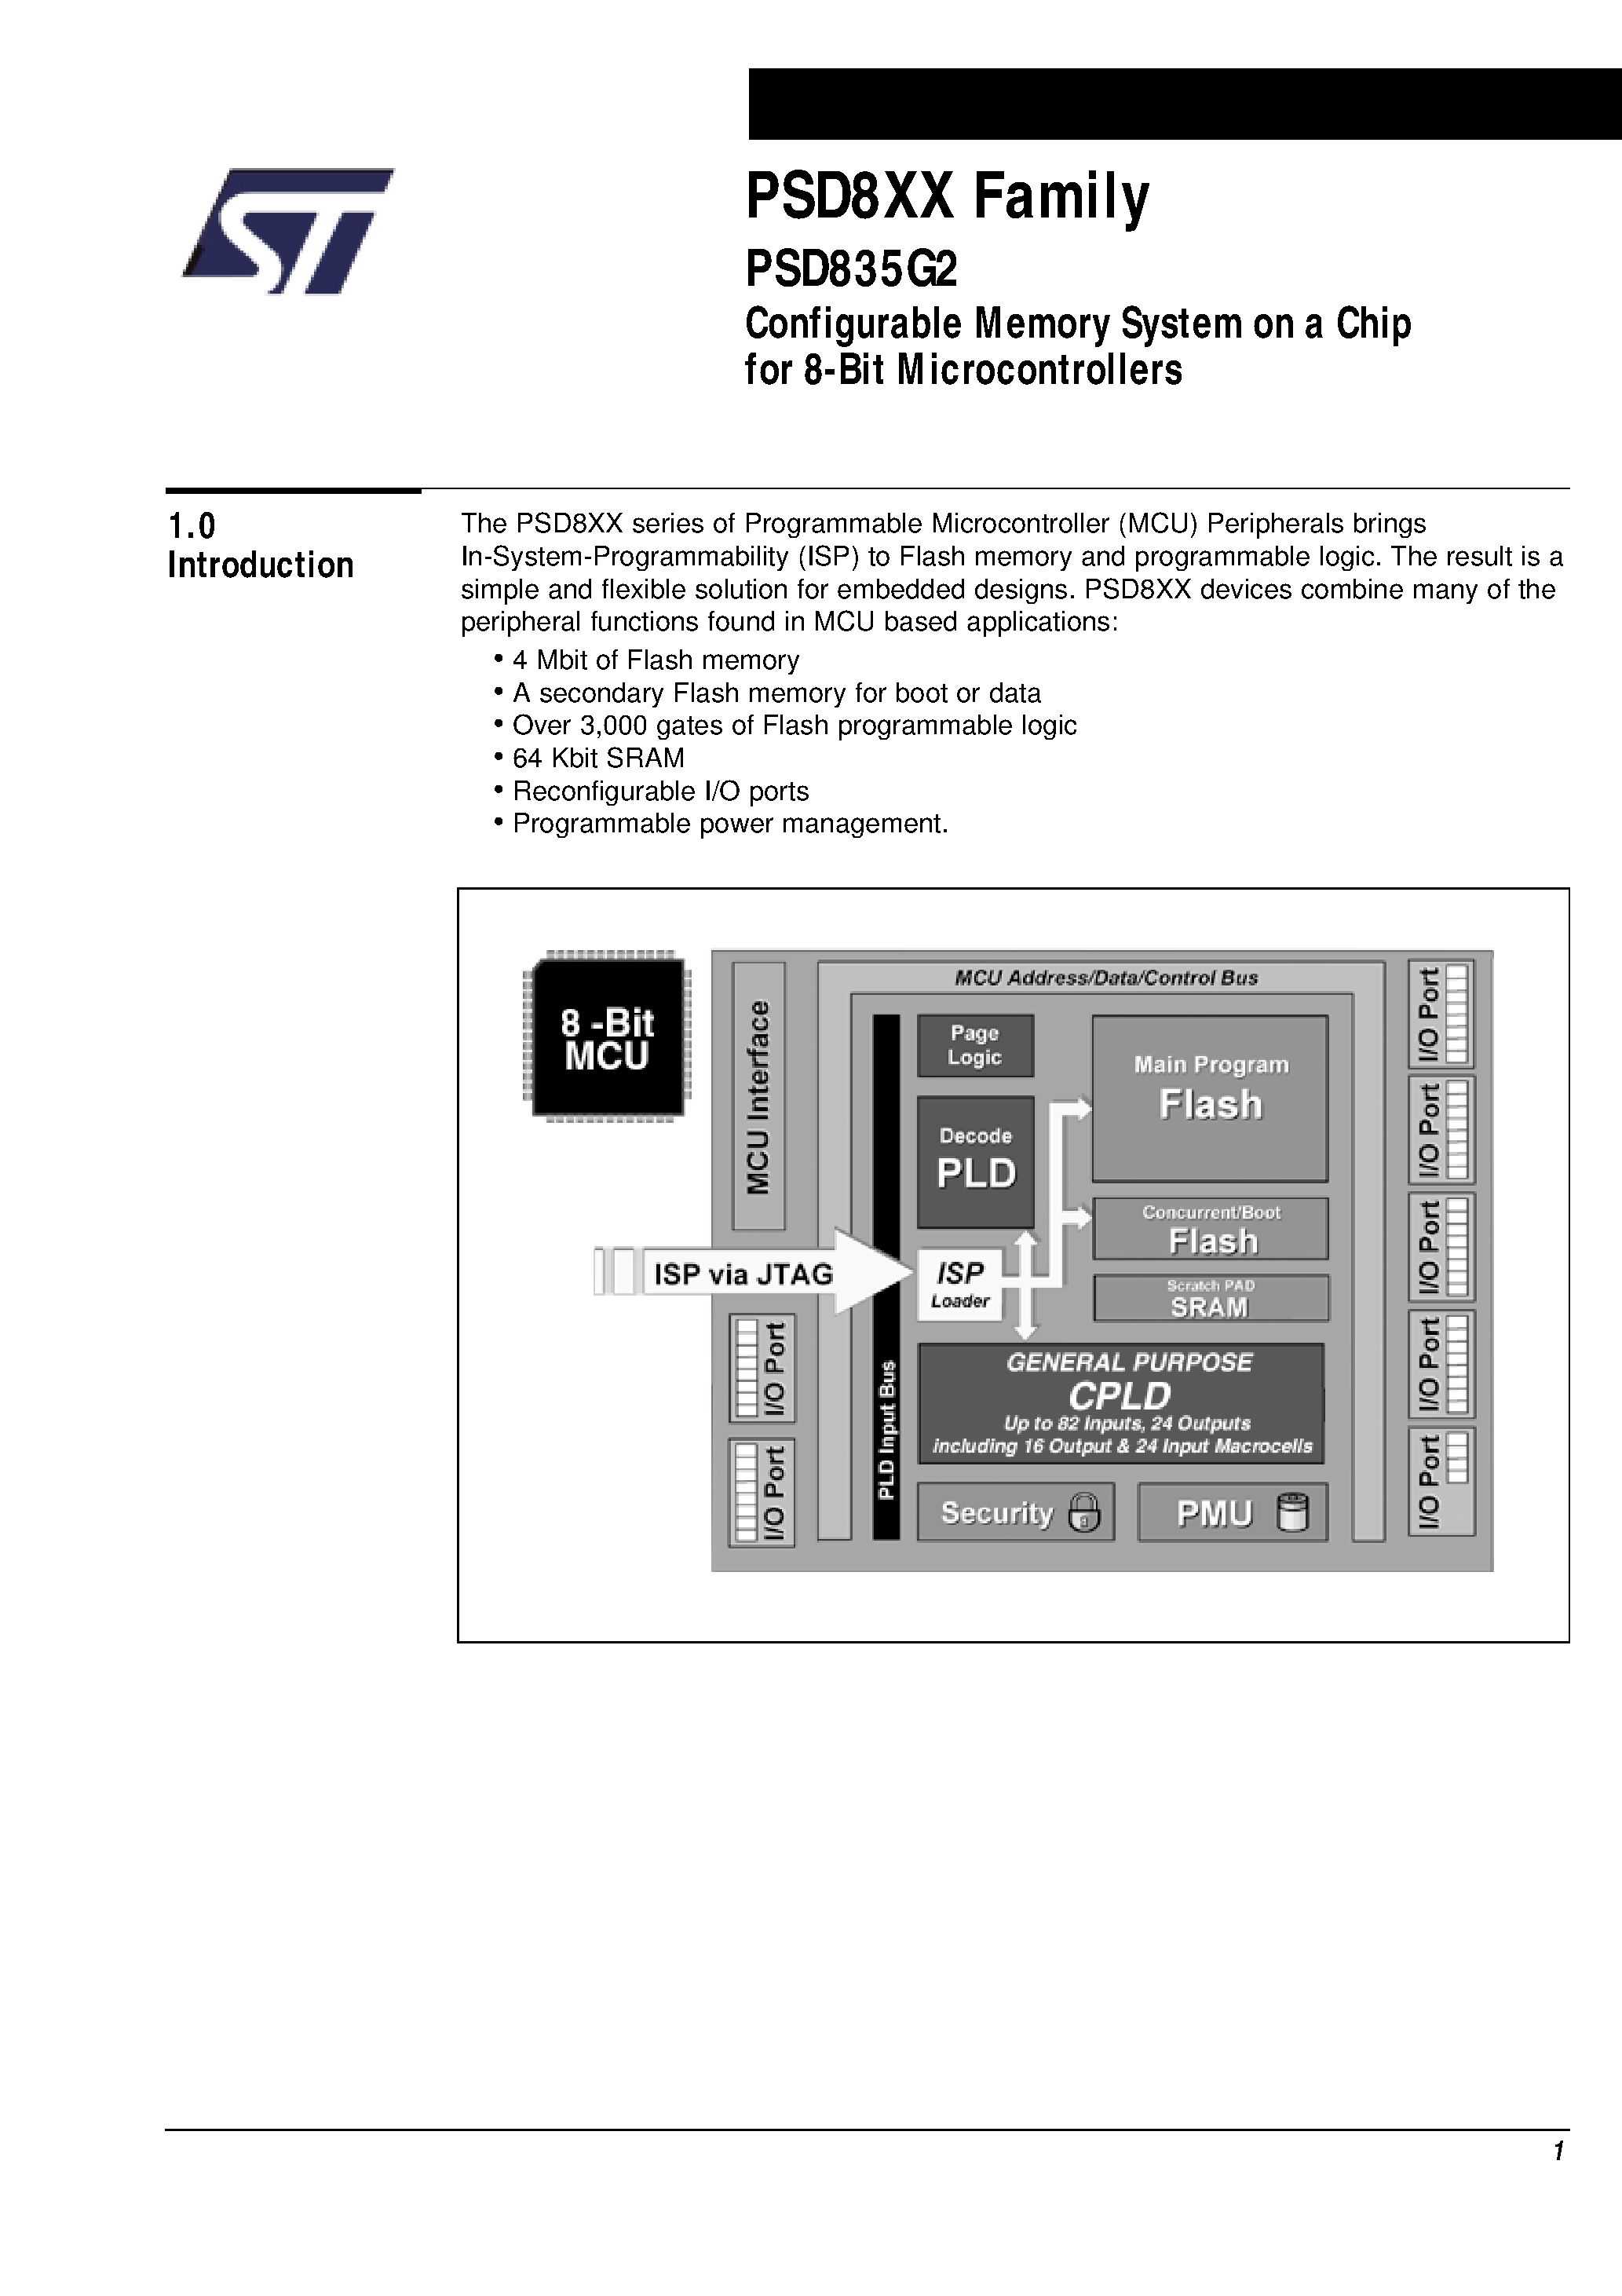 Datasheet PSD835F3-A-12J - Configurable Memory System on a Chip for 8-Bit Microcontrollers page 2